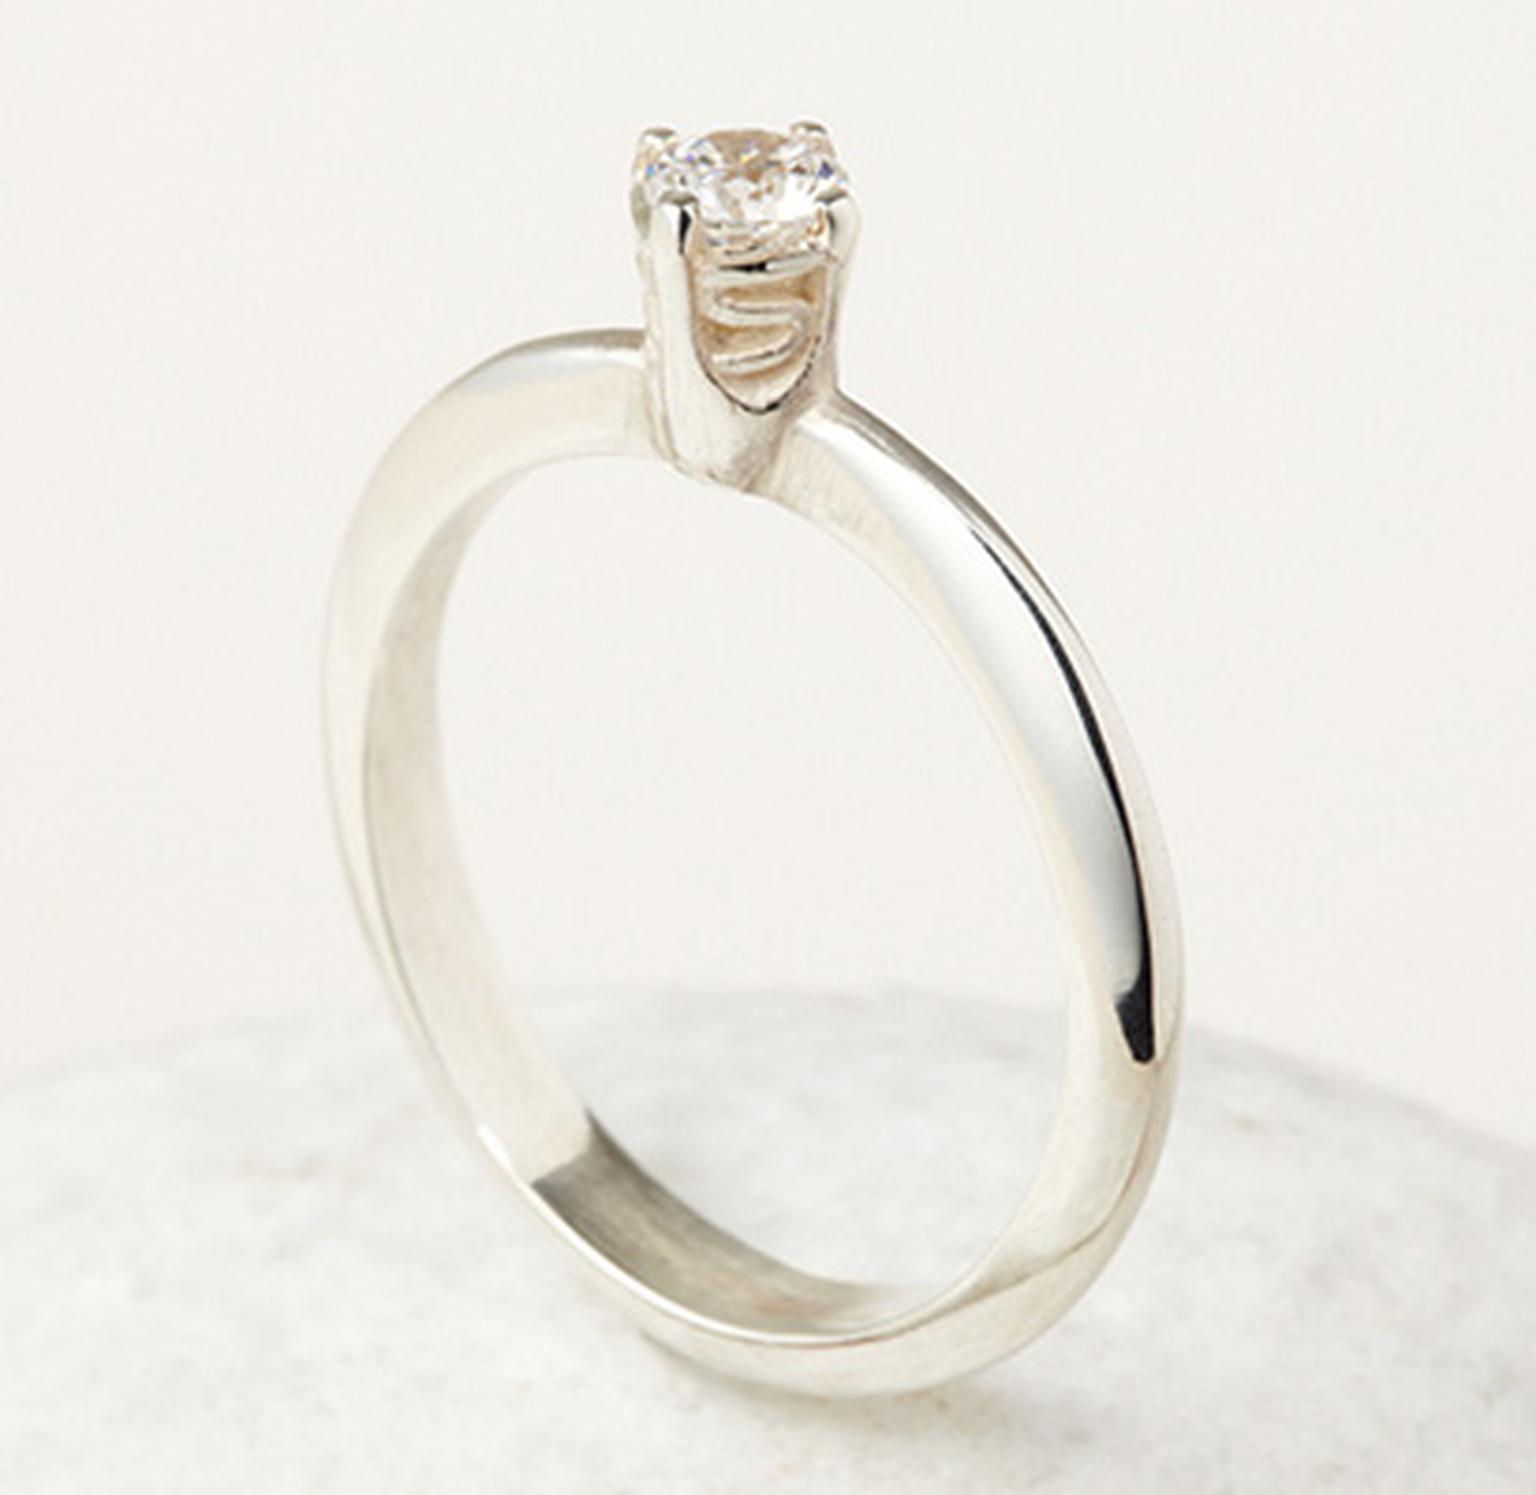 April Doubleday 4 Claw Ring with Waves (from £1,650) in 18ct Fairtrade white gold